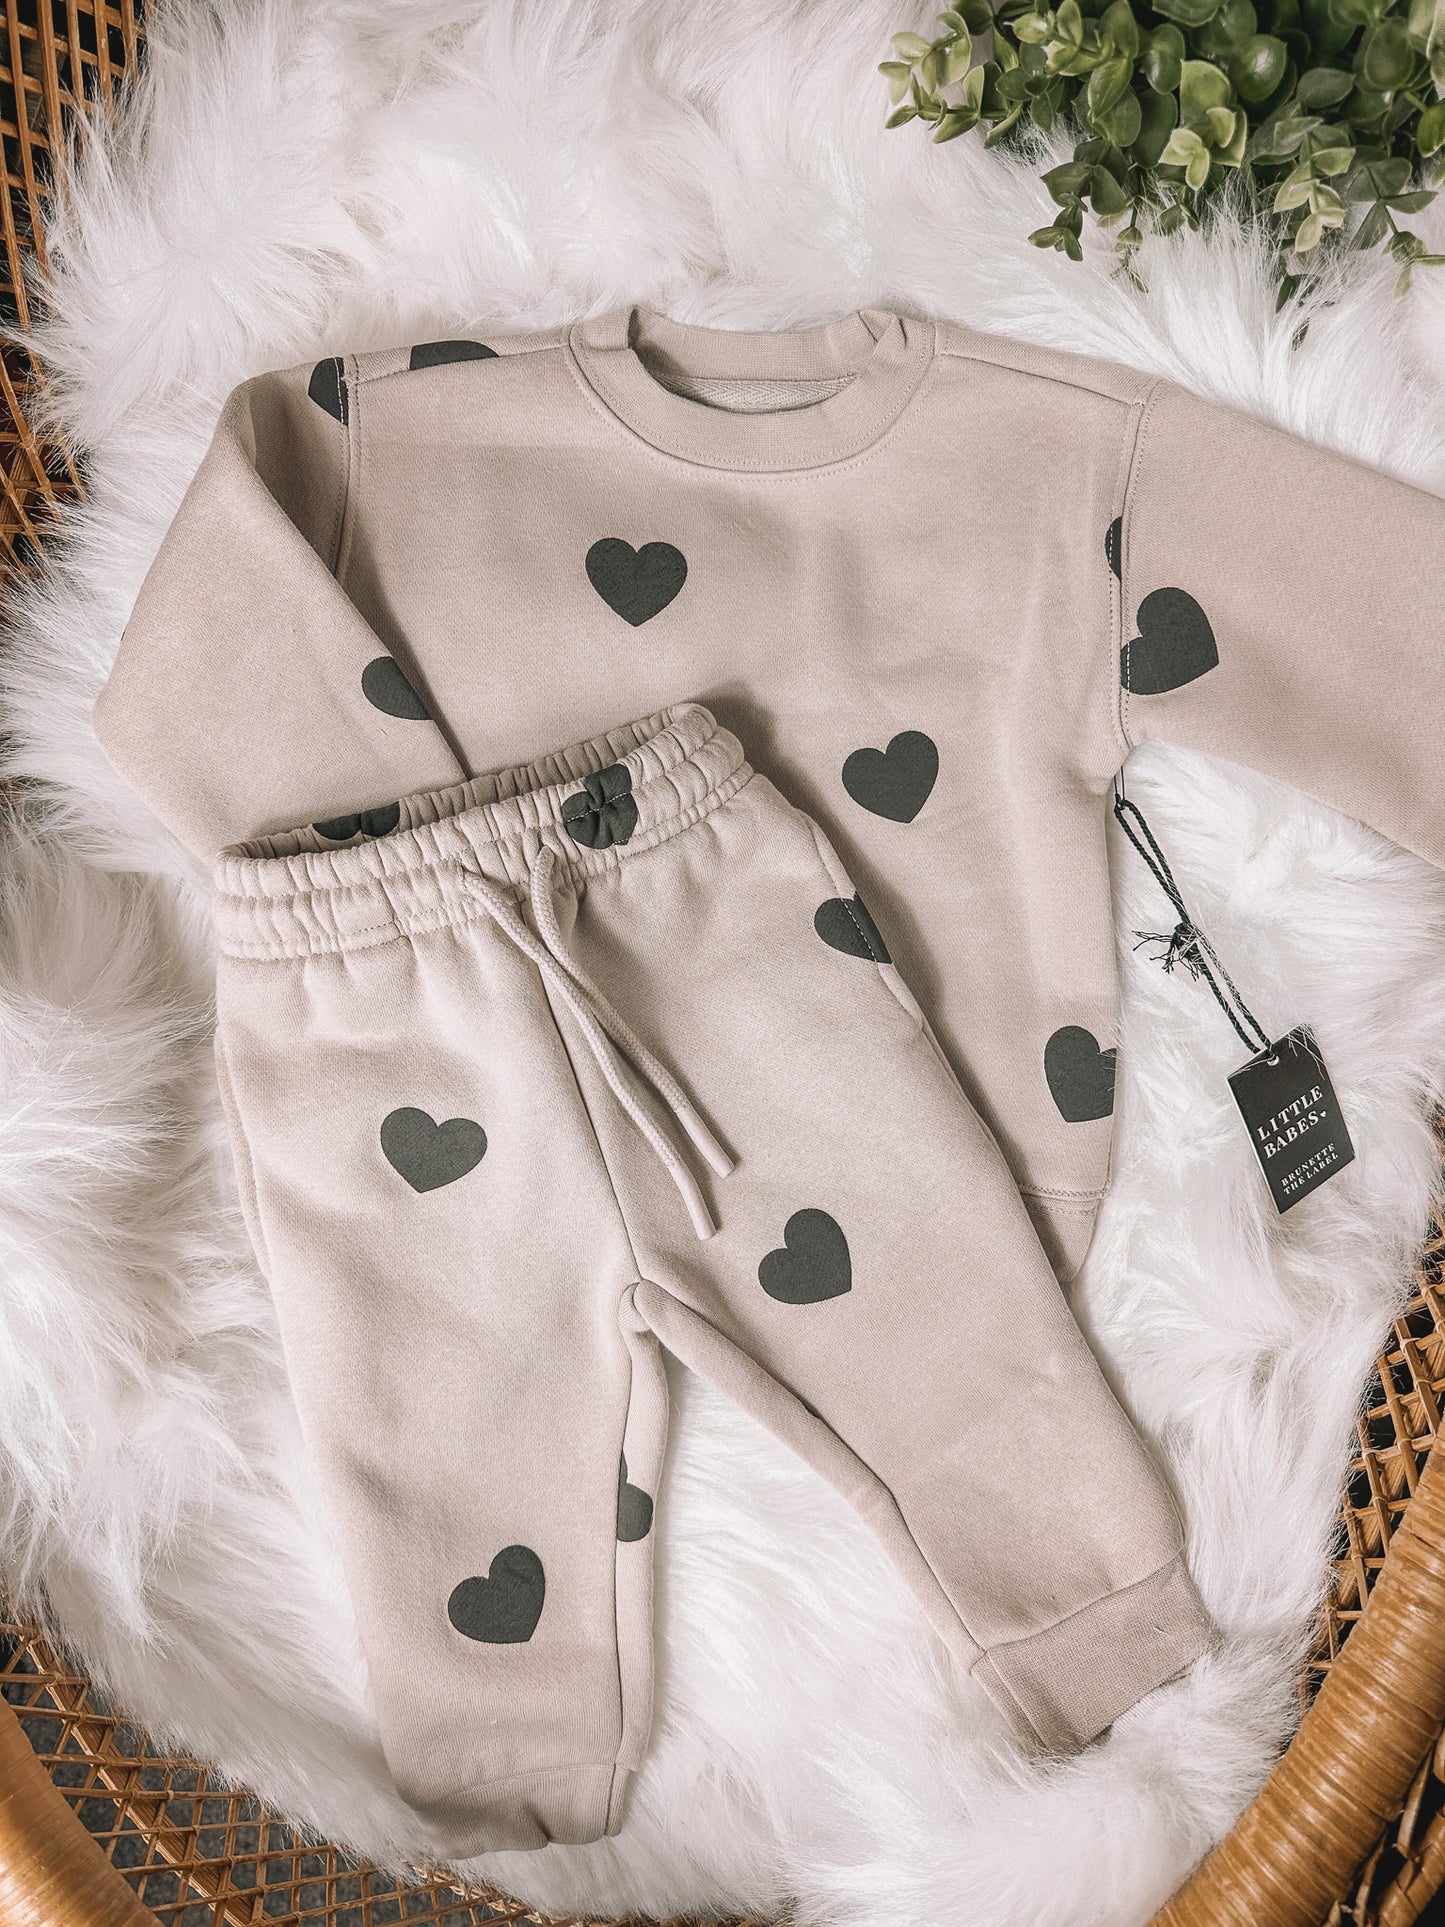 The BRUNETTE Label Little Babes "ALL OVER HEARTS" Crewneck in Oyster